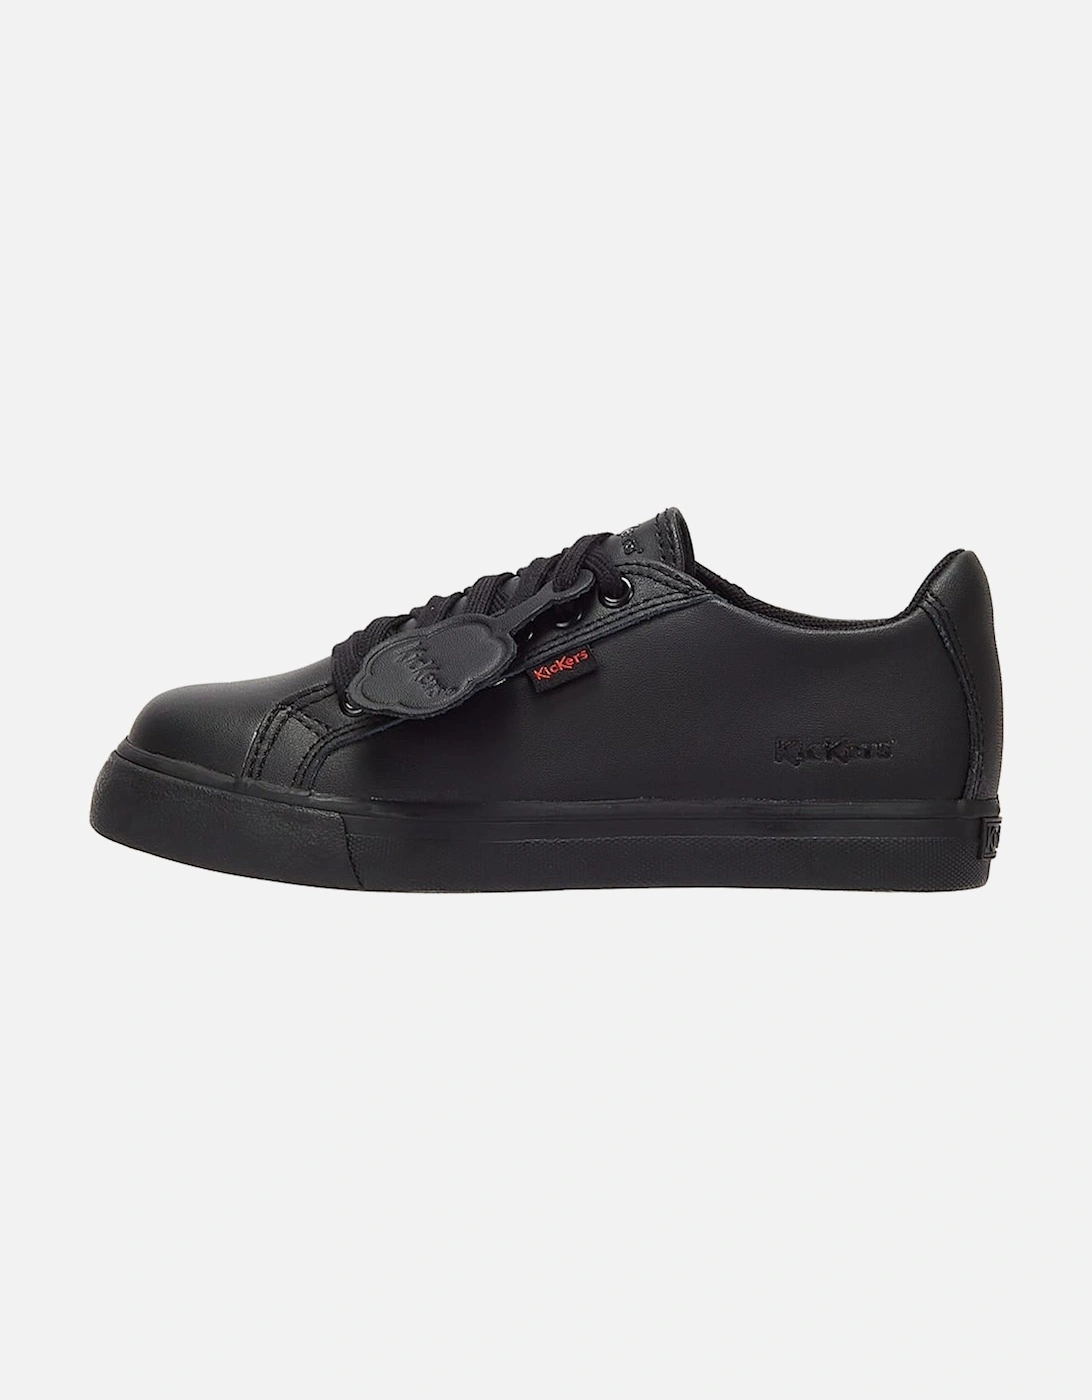 Tovni Lacer Leather Junior Black Trainers